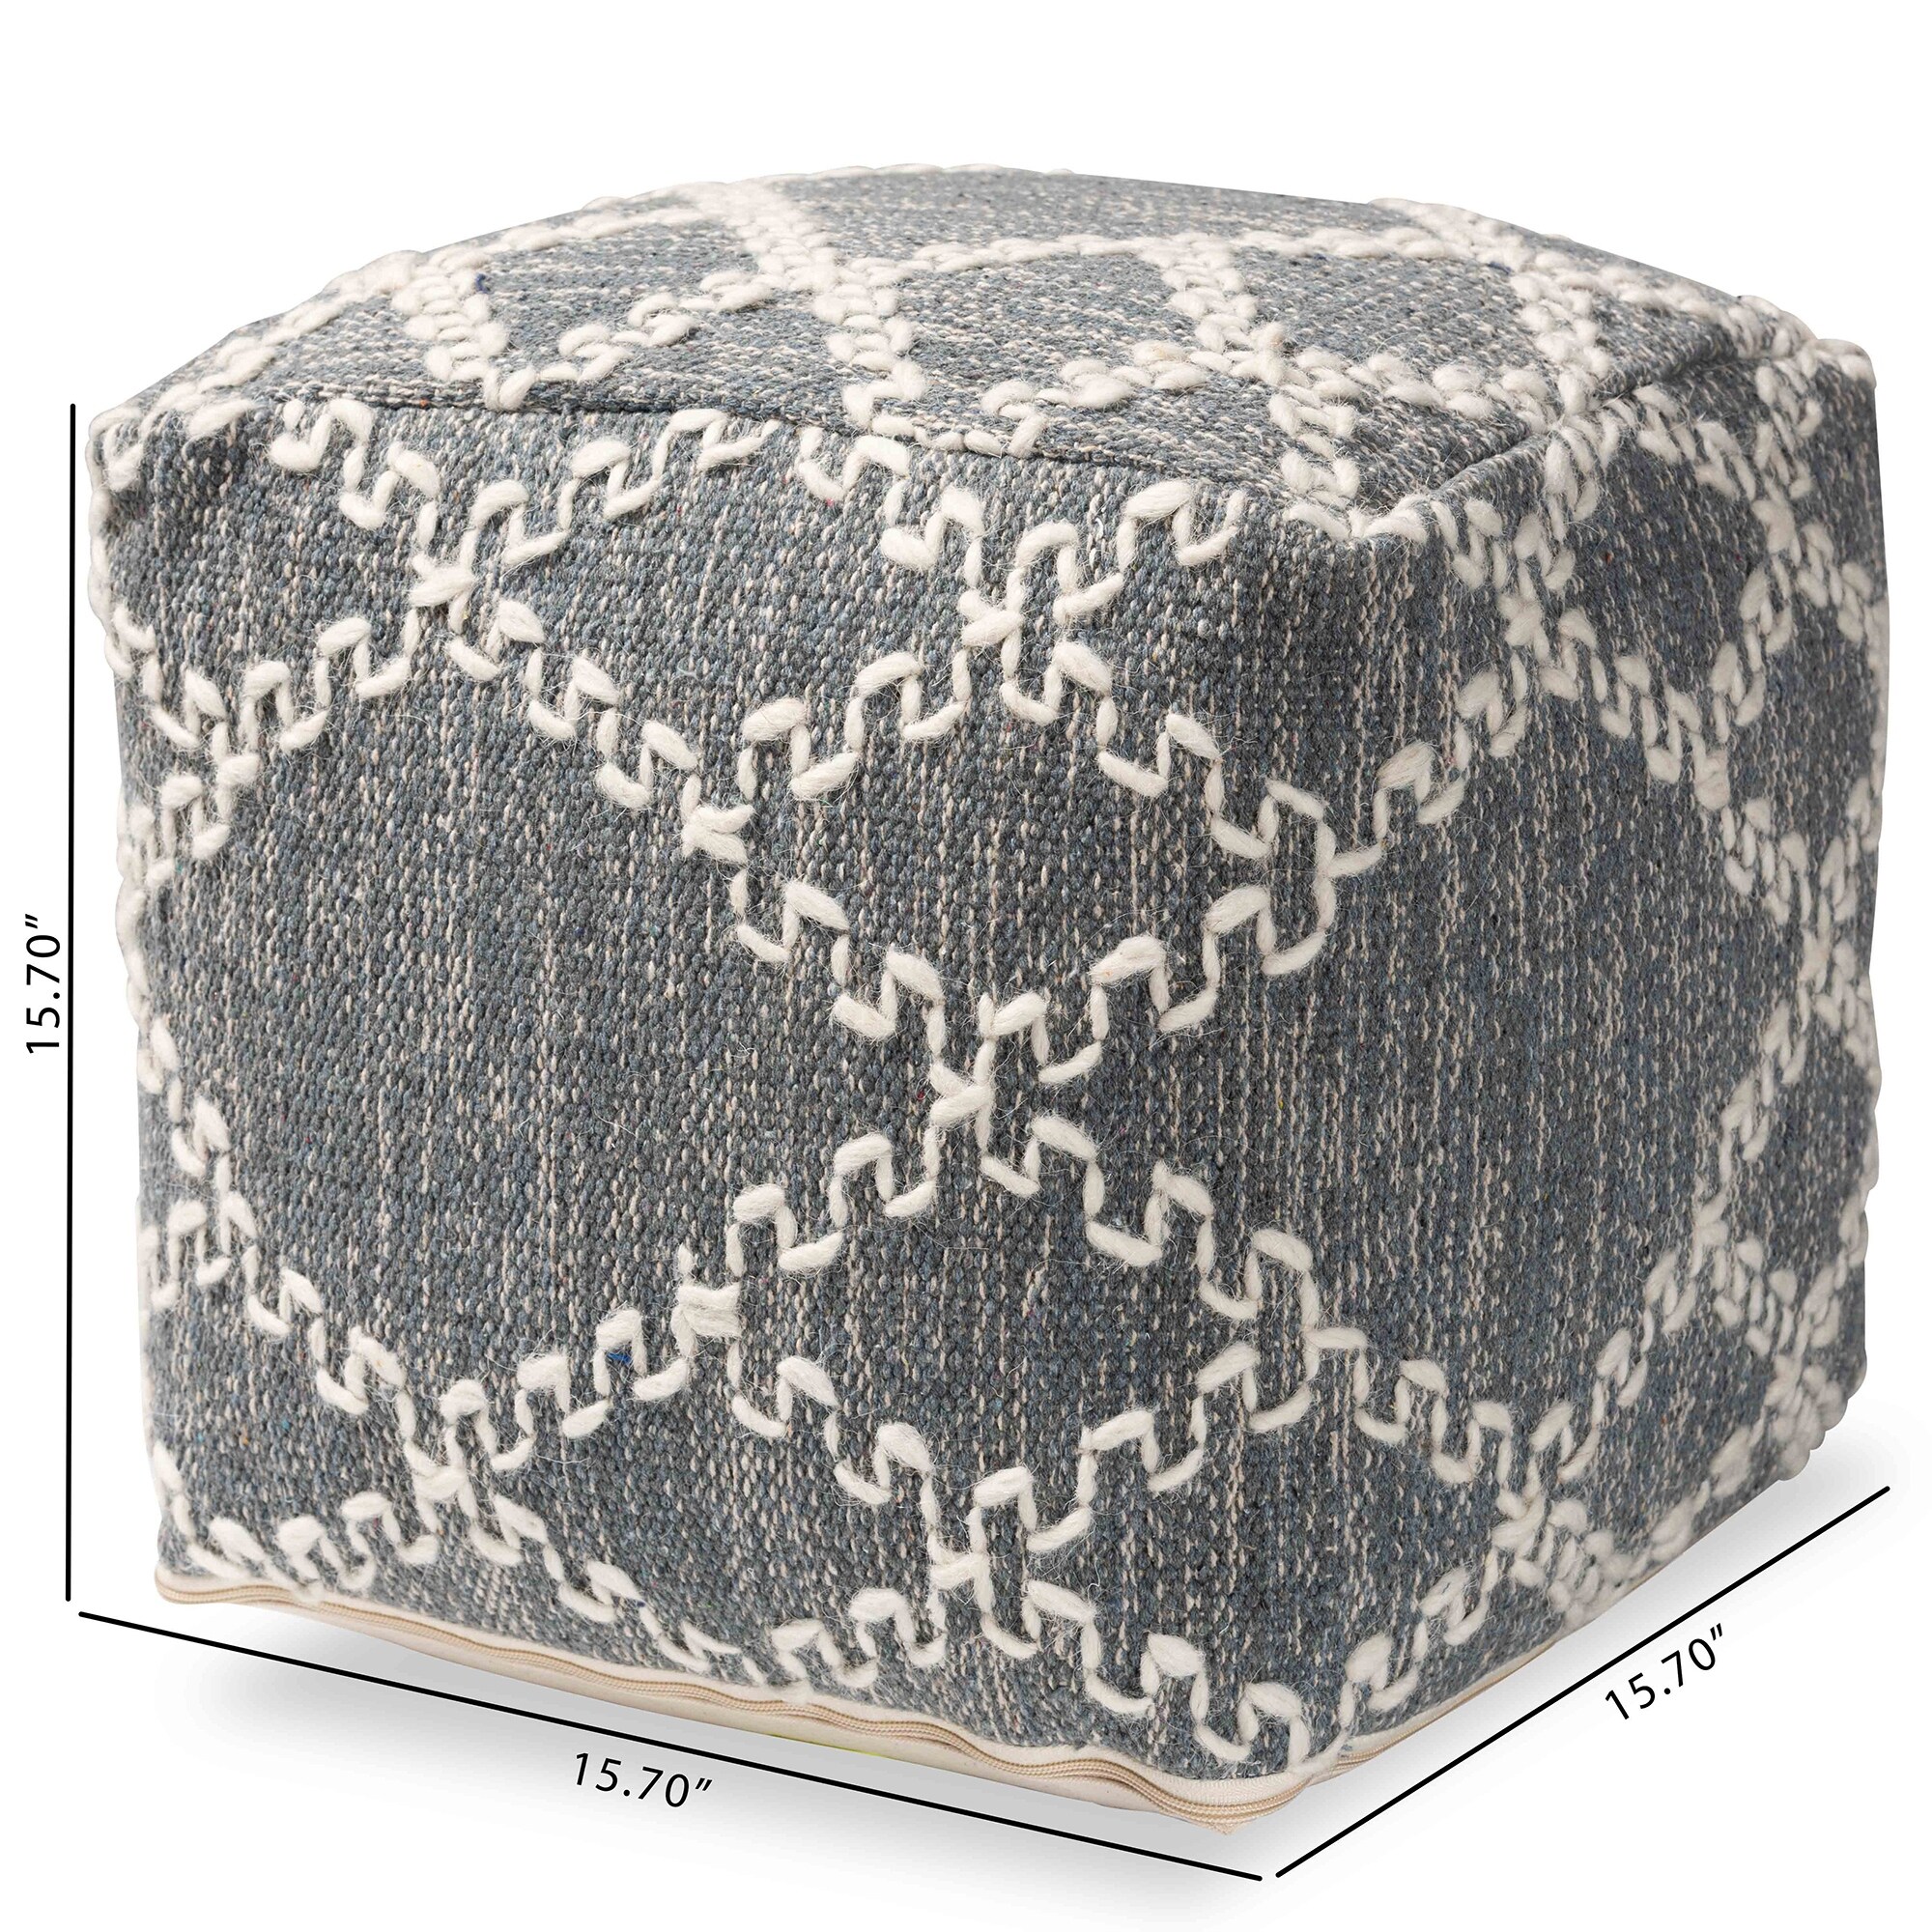 Geyne Modern and Bohemian styled Handwoven Cotton Pouf in Grey color